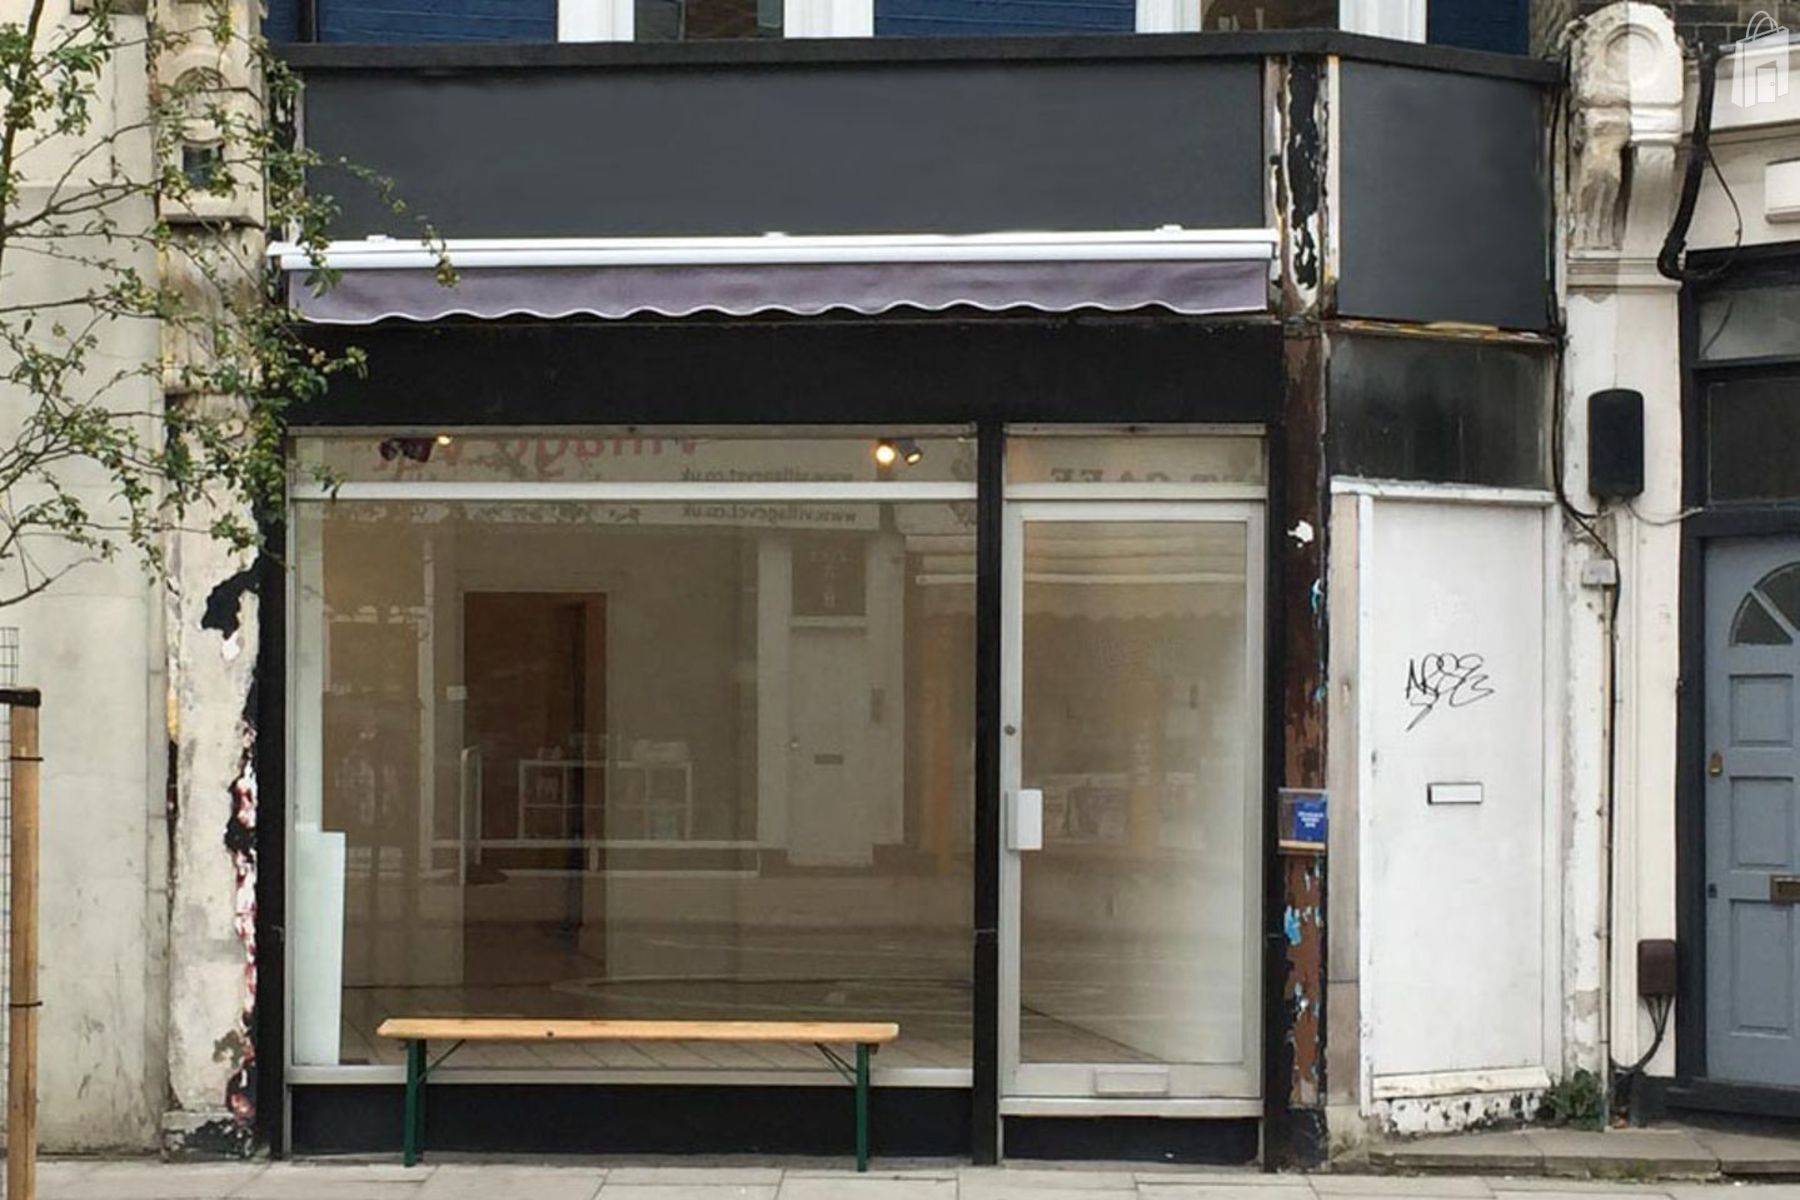 Clean Space in North in Greater London - rent this pop up shop on POPUPSHOPS.com.